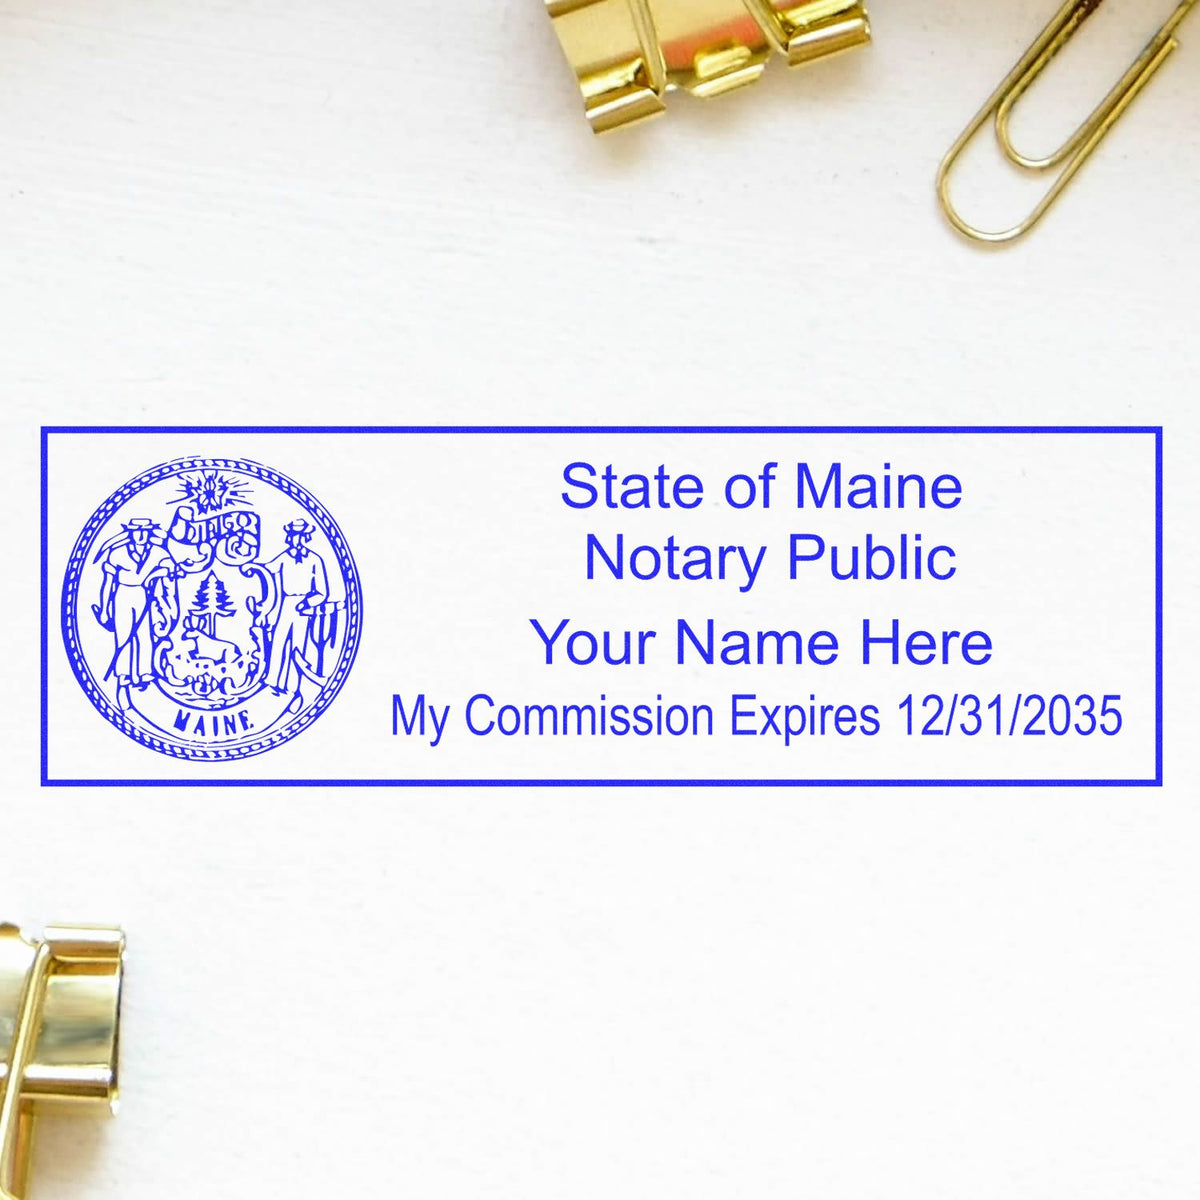 This paper is stamped with a sample imprint of the Slim Pre-Inked State Seal Notary Stamp for Maine, signifying its quality and reliability.